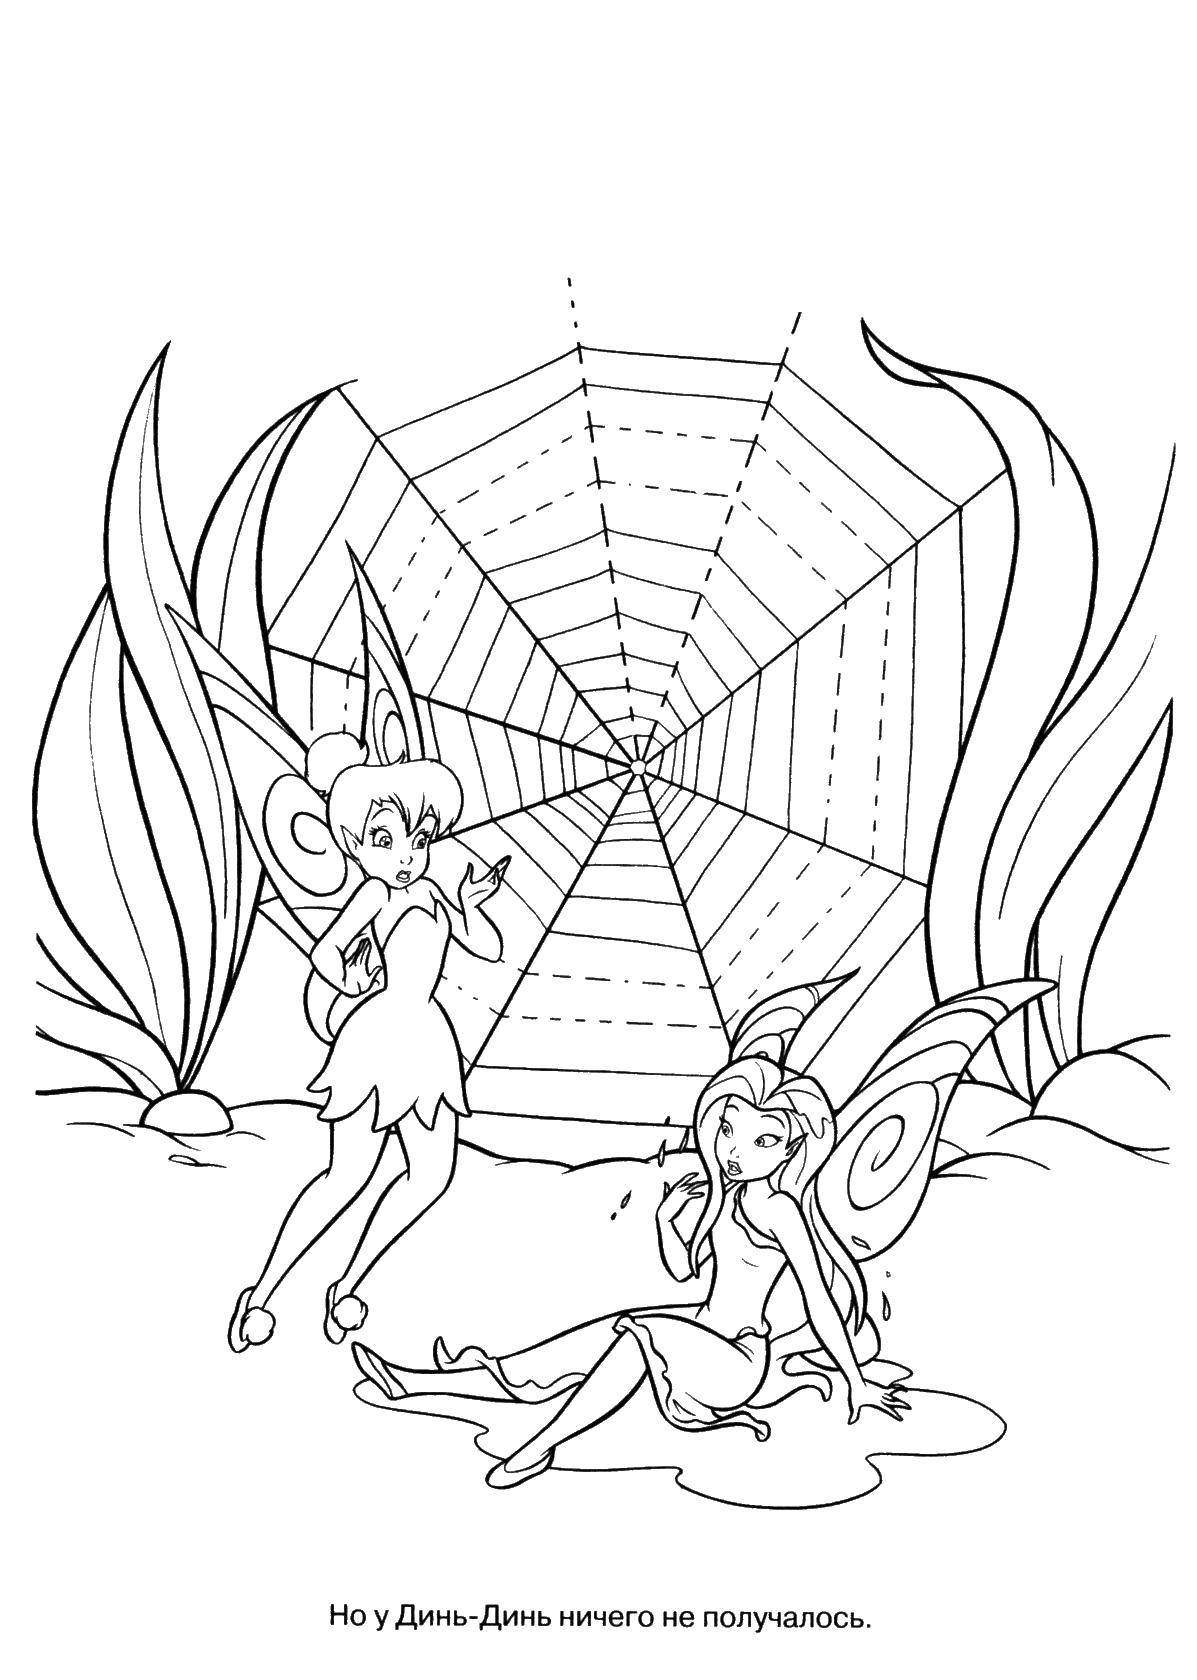 Coloring Tinker bell and silvermist. Category fairies. Tags:  fairies Dingding, silverfish.